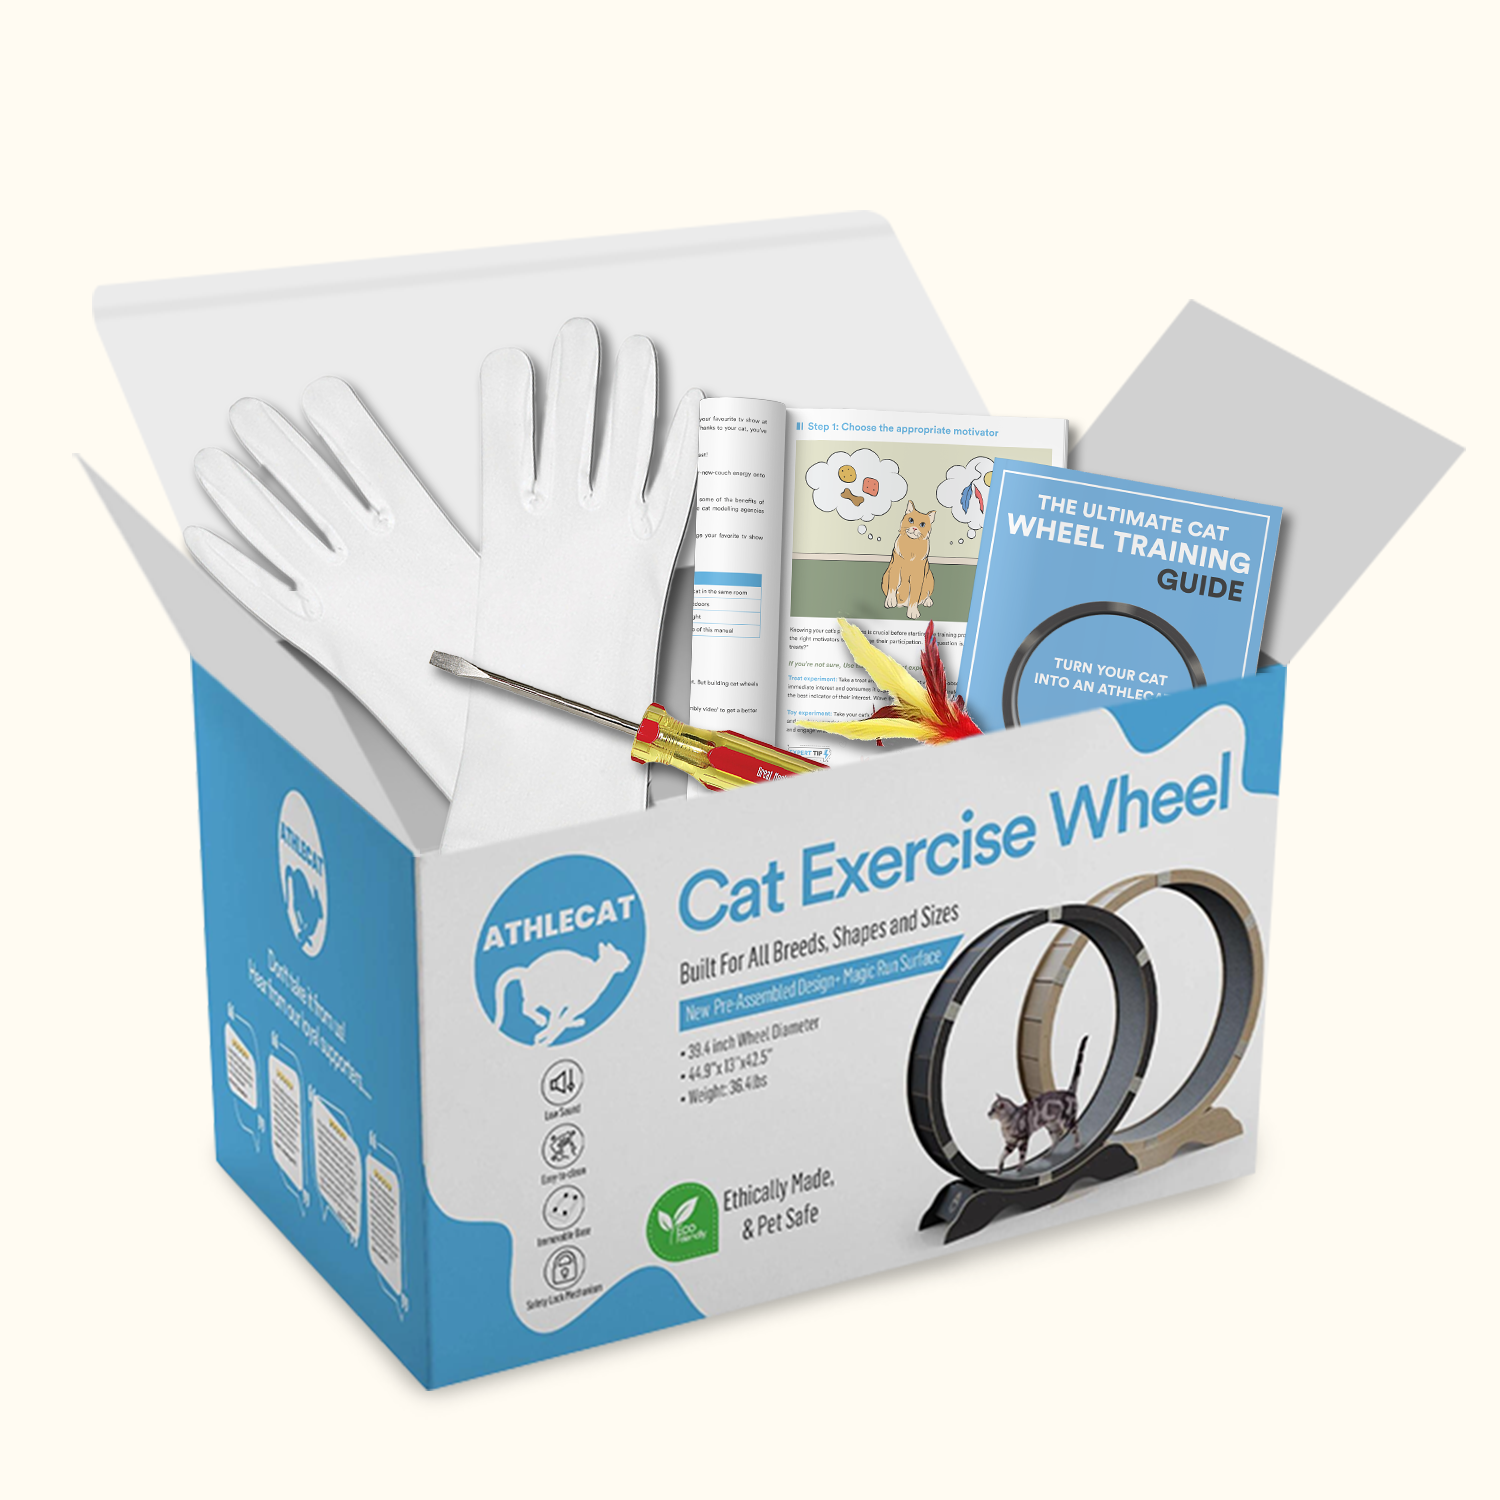 free toys and accessories that come with the athlecat spinning wheel for cats